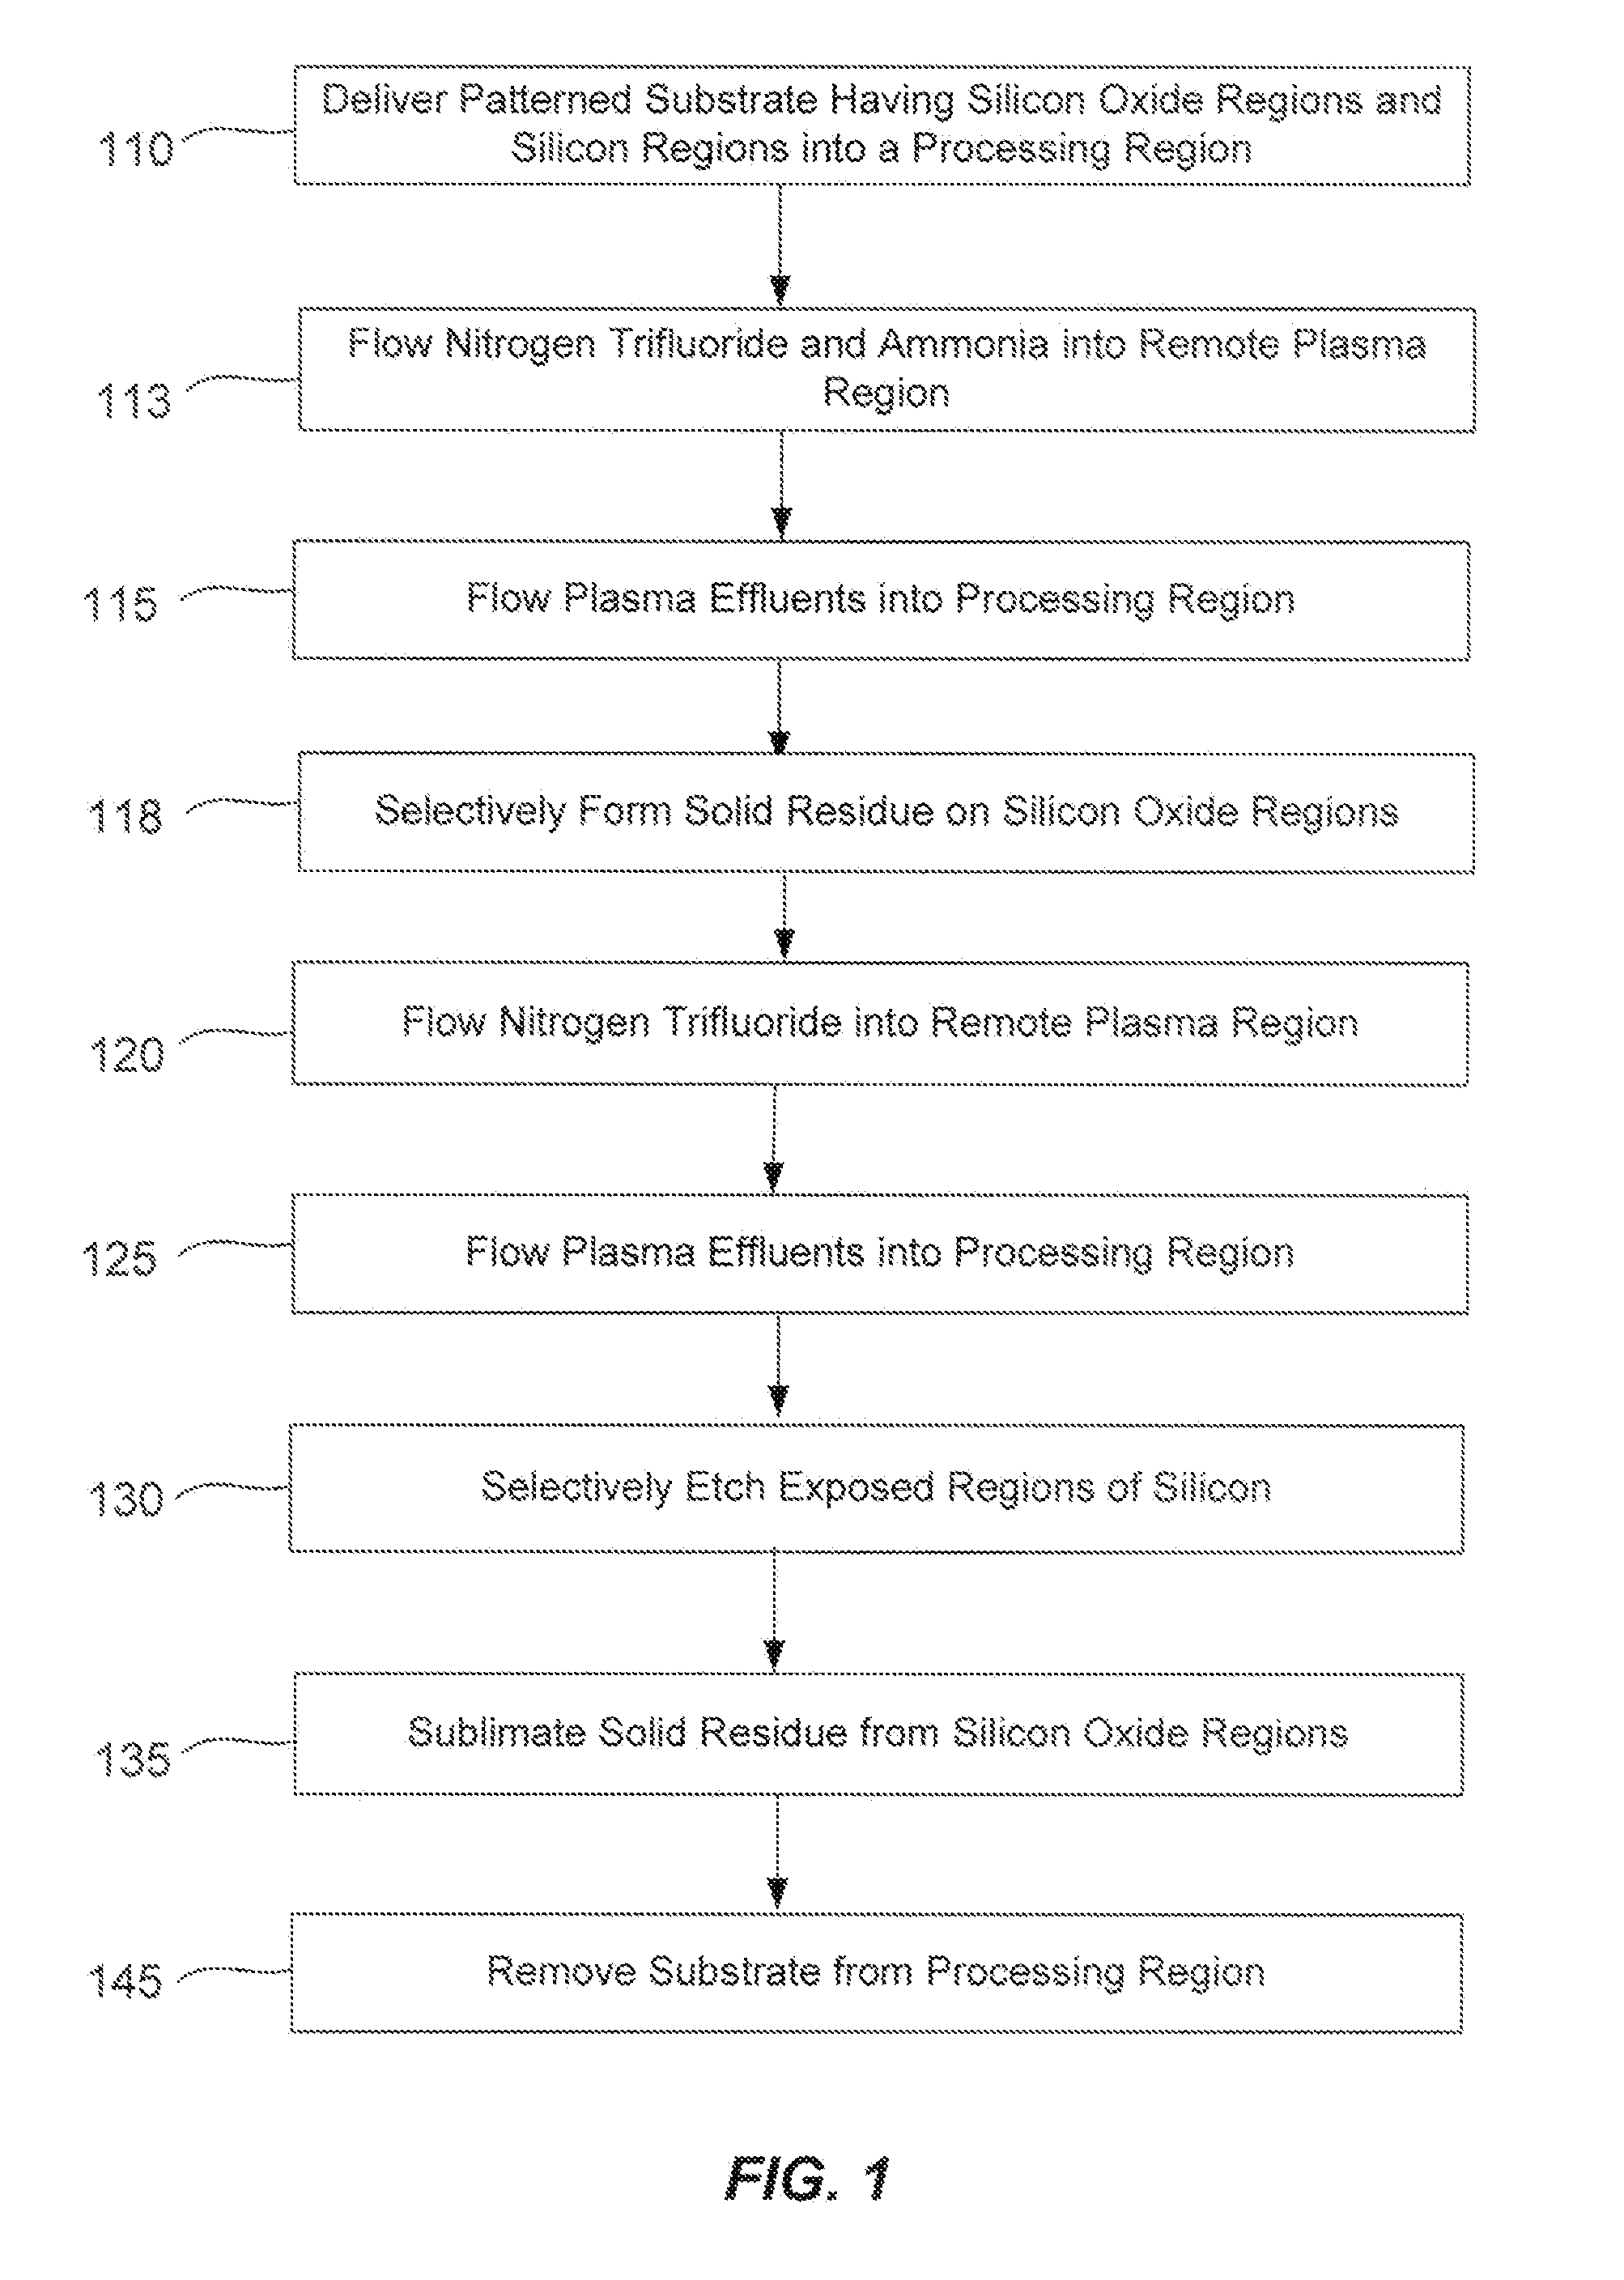 Selective suppression of dry-etch rate of materials containing both silicon and oxygen